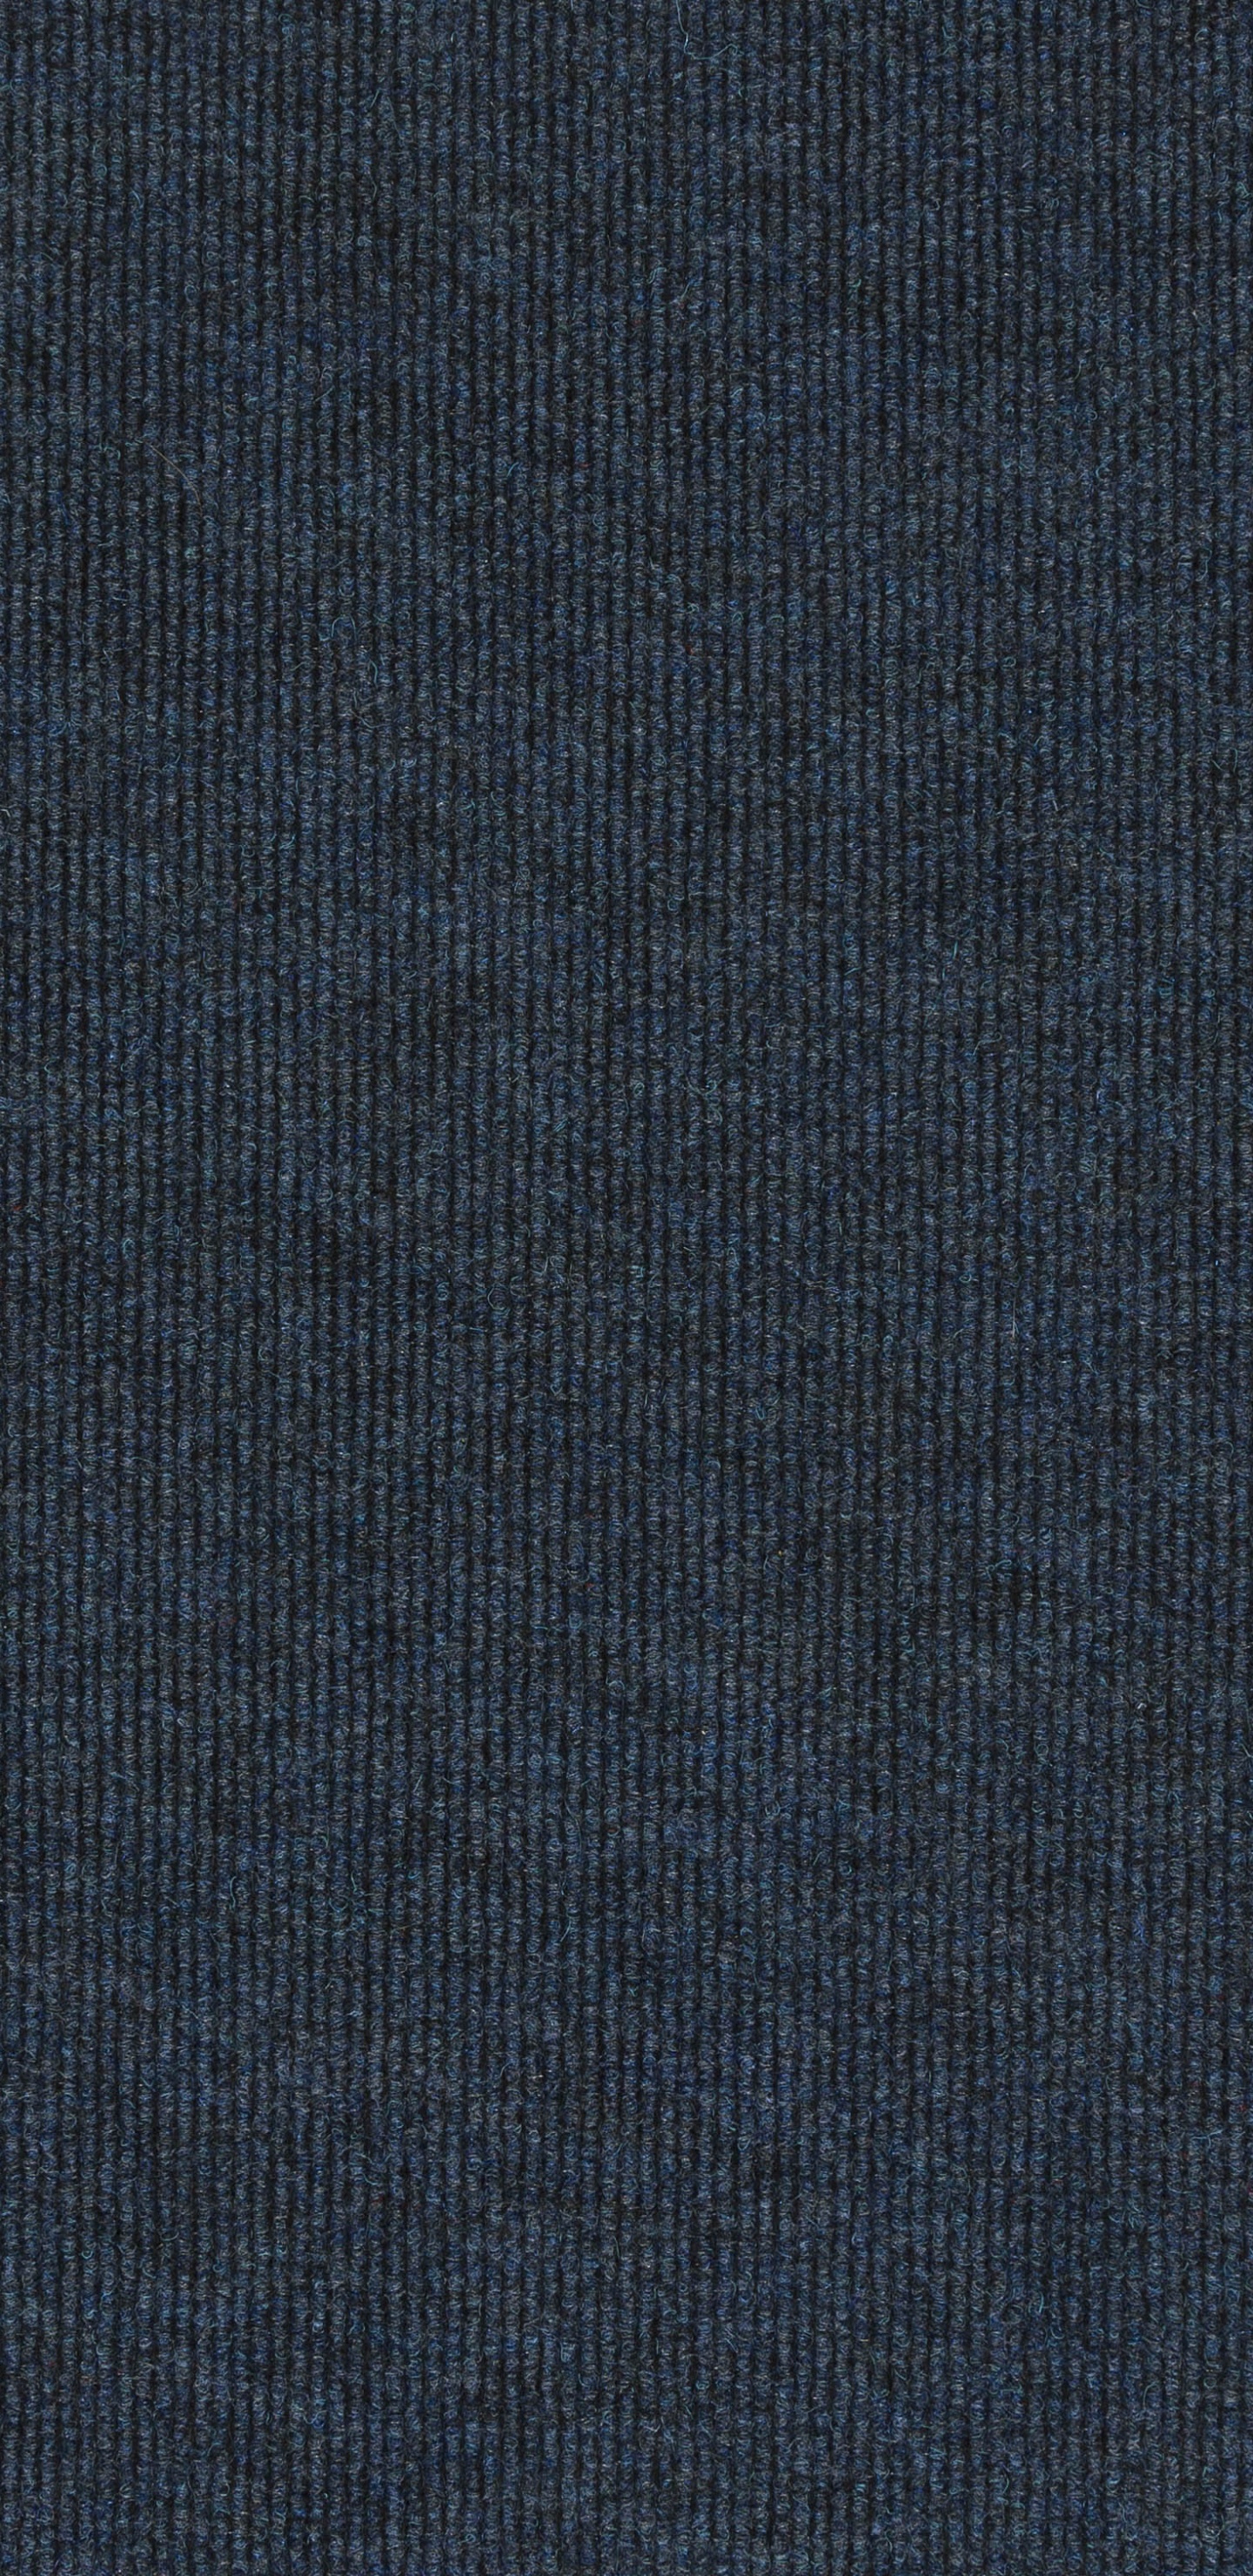 Blue Textile With Black Background. Wallpaper in 1440x2960 Resolution